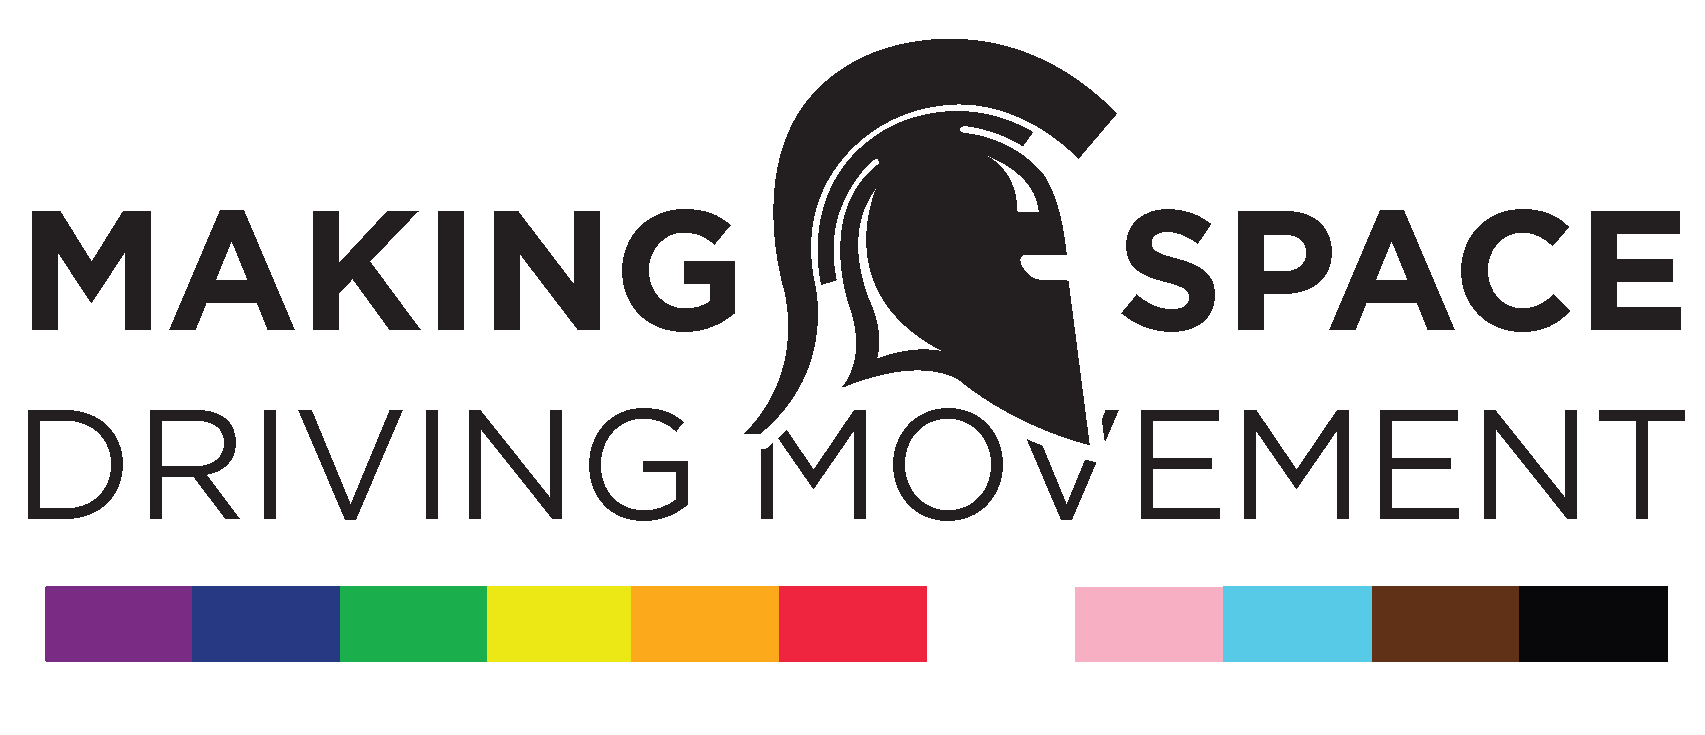 Making space, driving movement logo